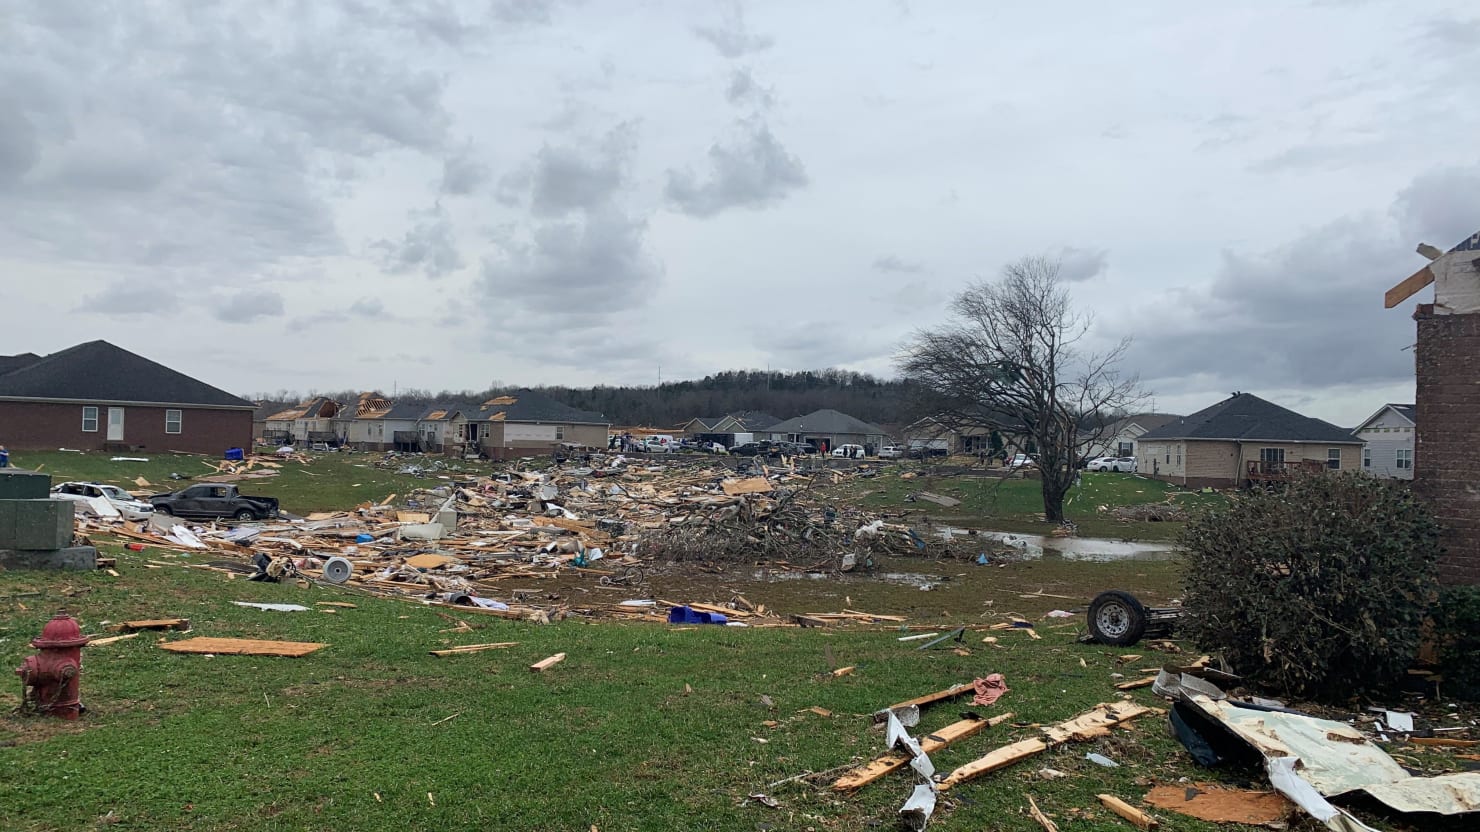 Bowling Green Tornadoes Killed Seven Kids Who All Lived on the Same Street